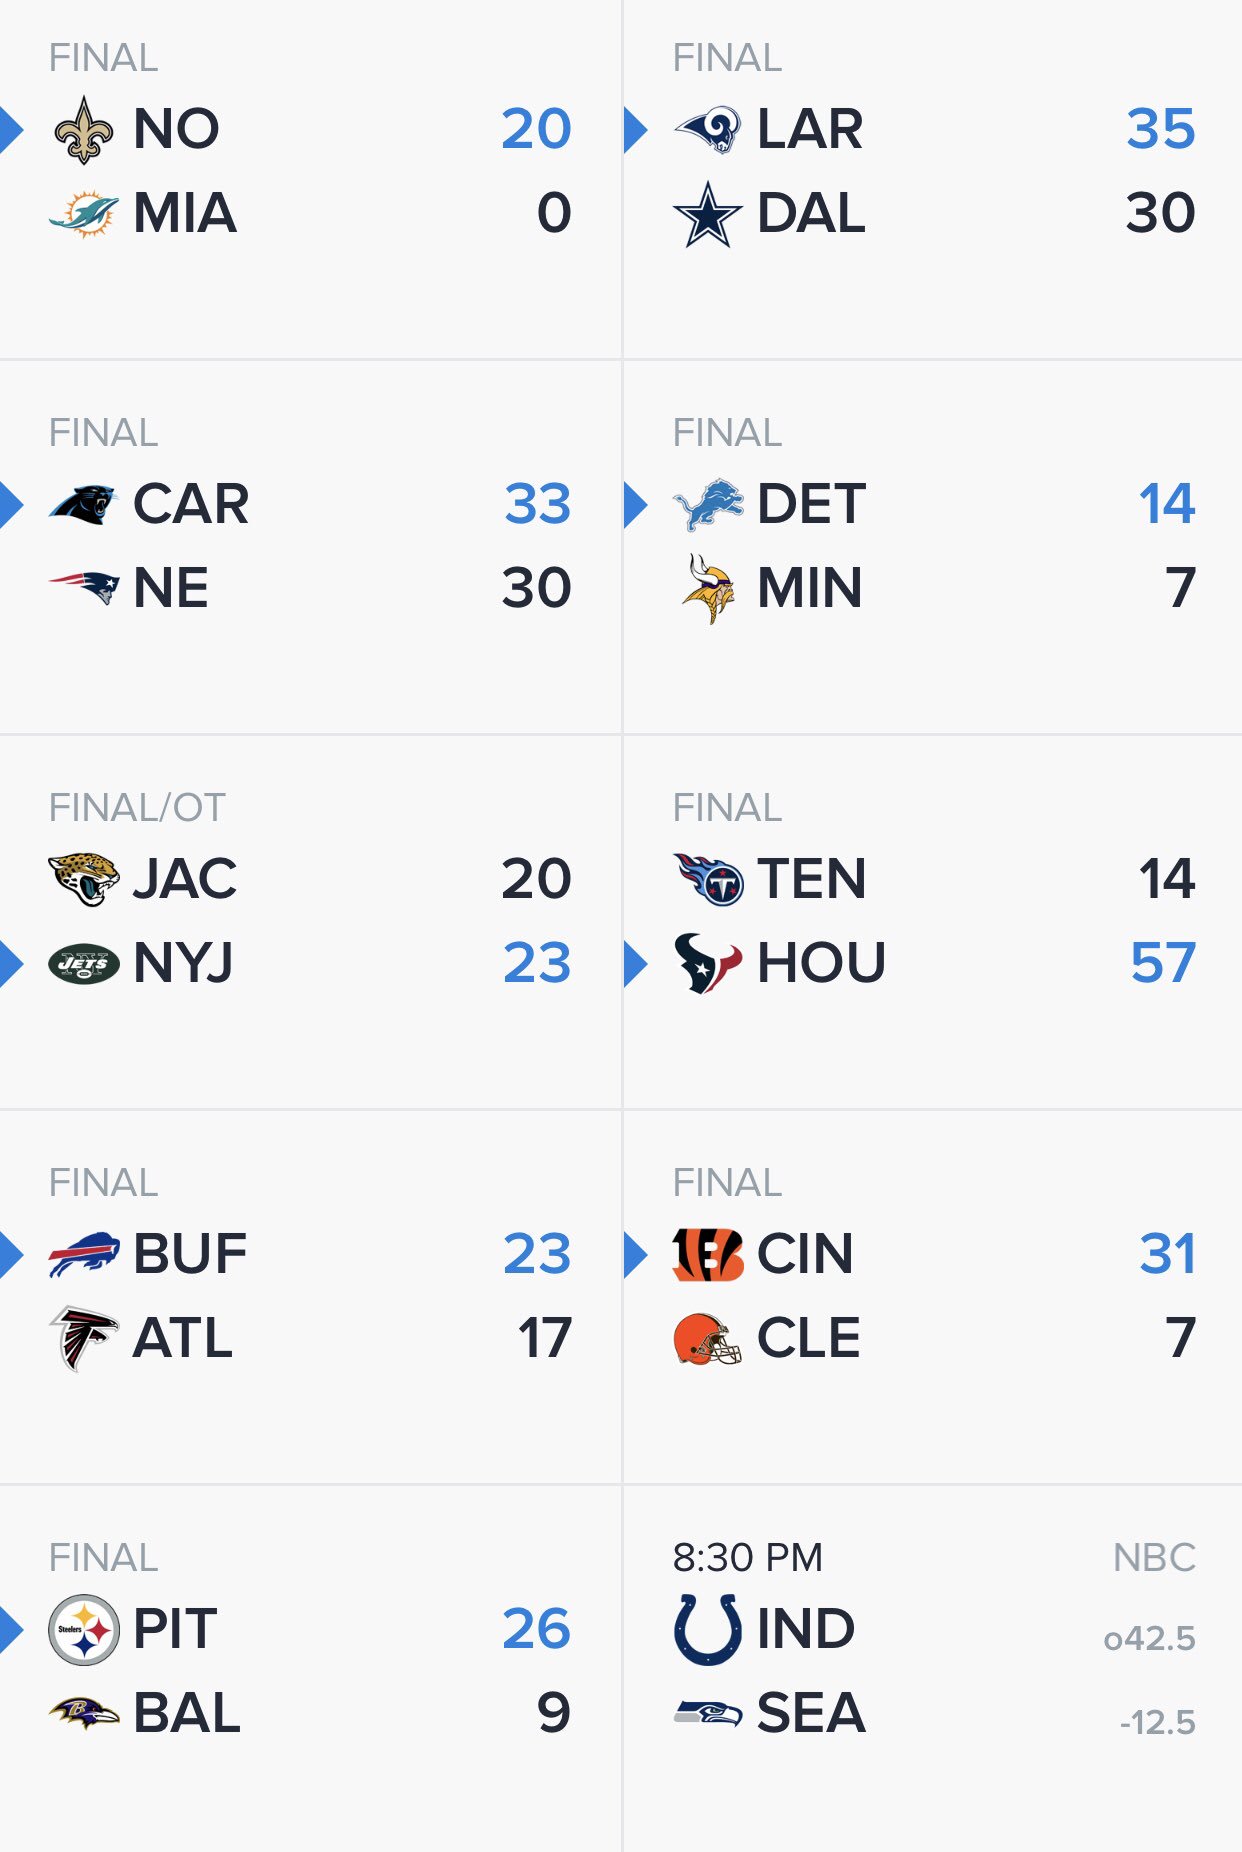 show me the nfl scores for today